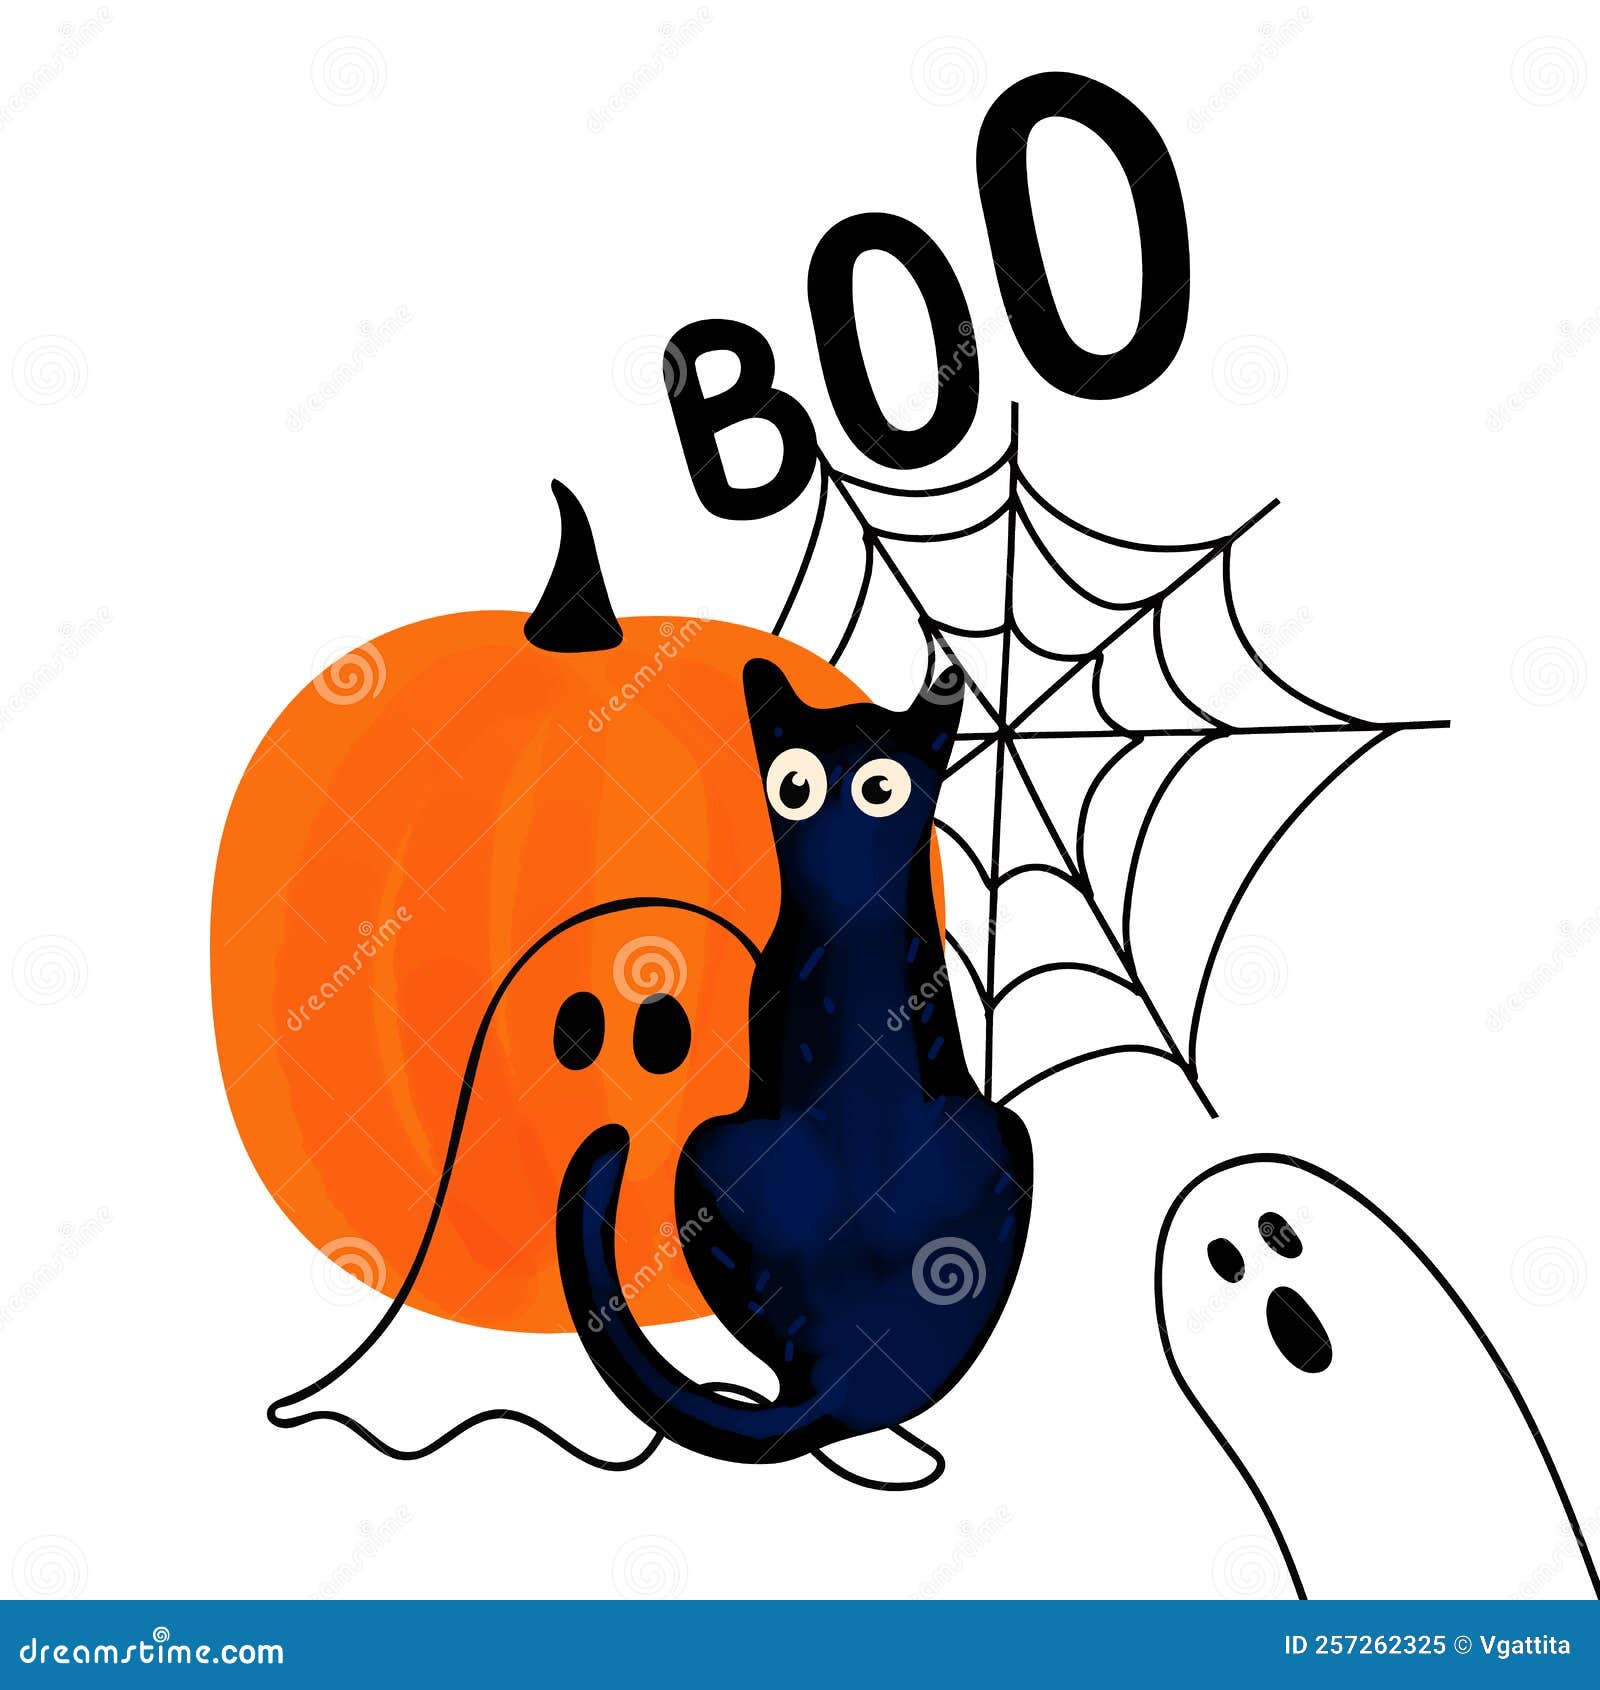 Illustration of a Black Cat, Orange Pumpkin and Ghosts on a White ...